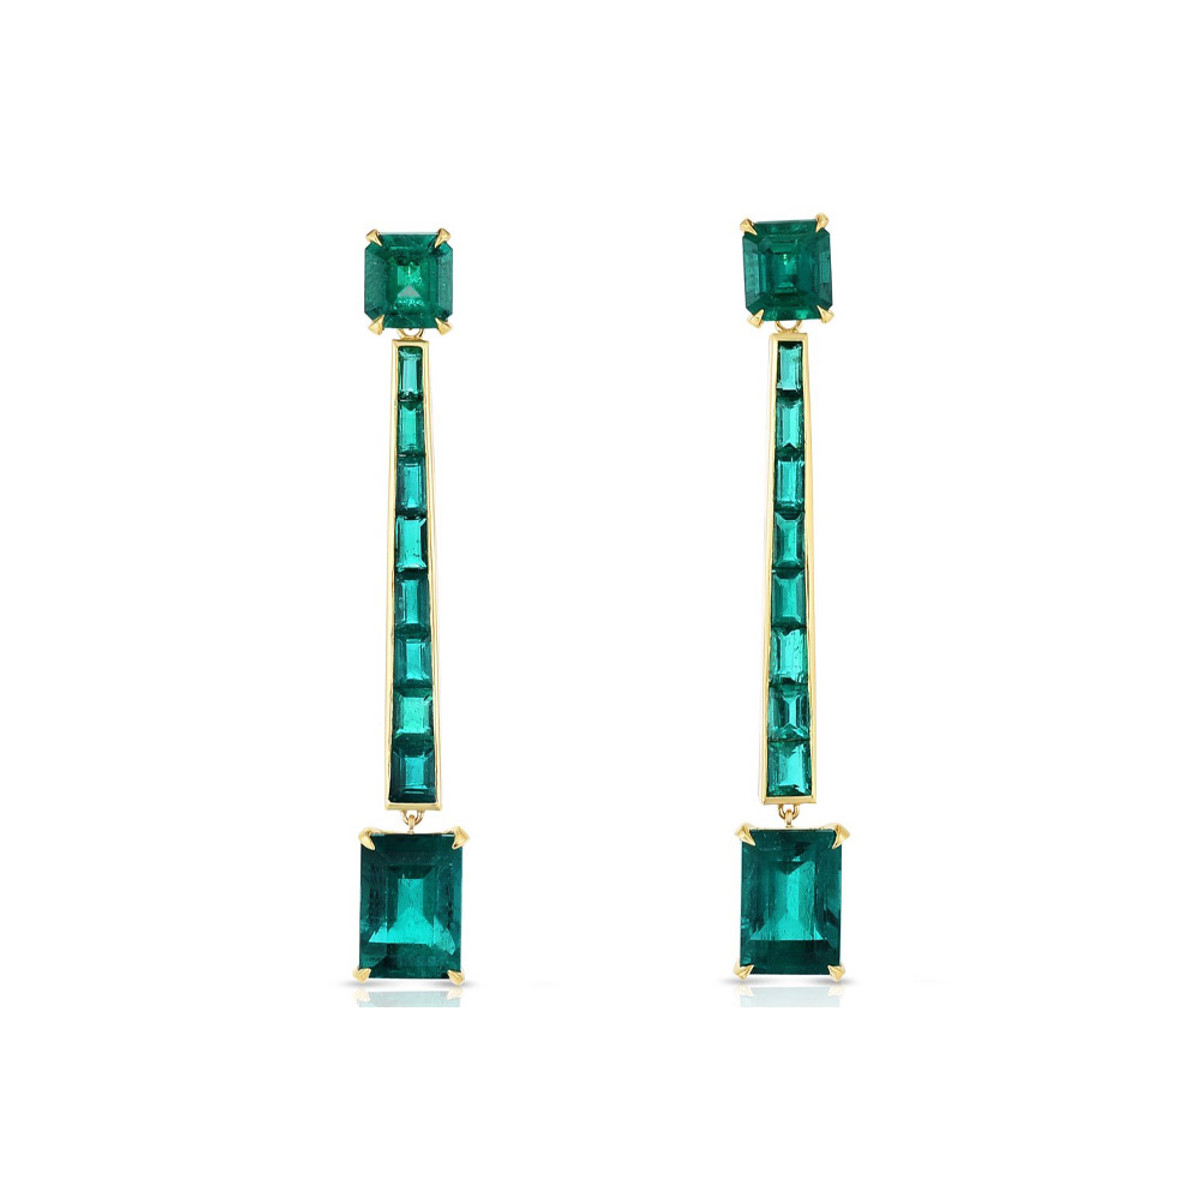 Hyde Park Collection 18K Yellow Gold Emerald Earrings-54459 Product Image